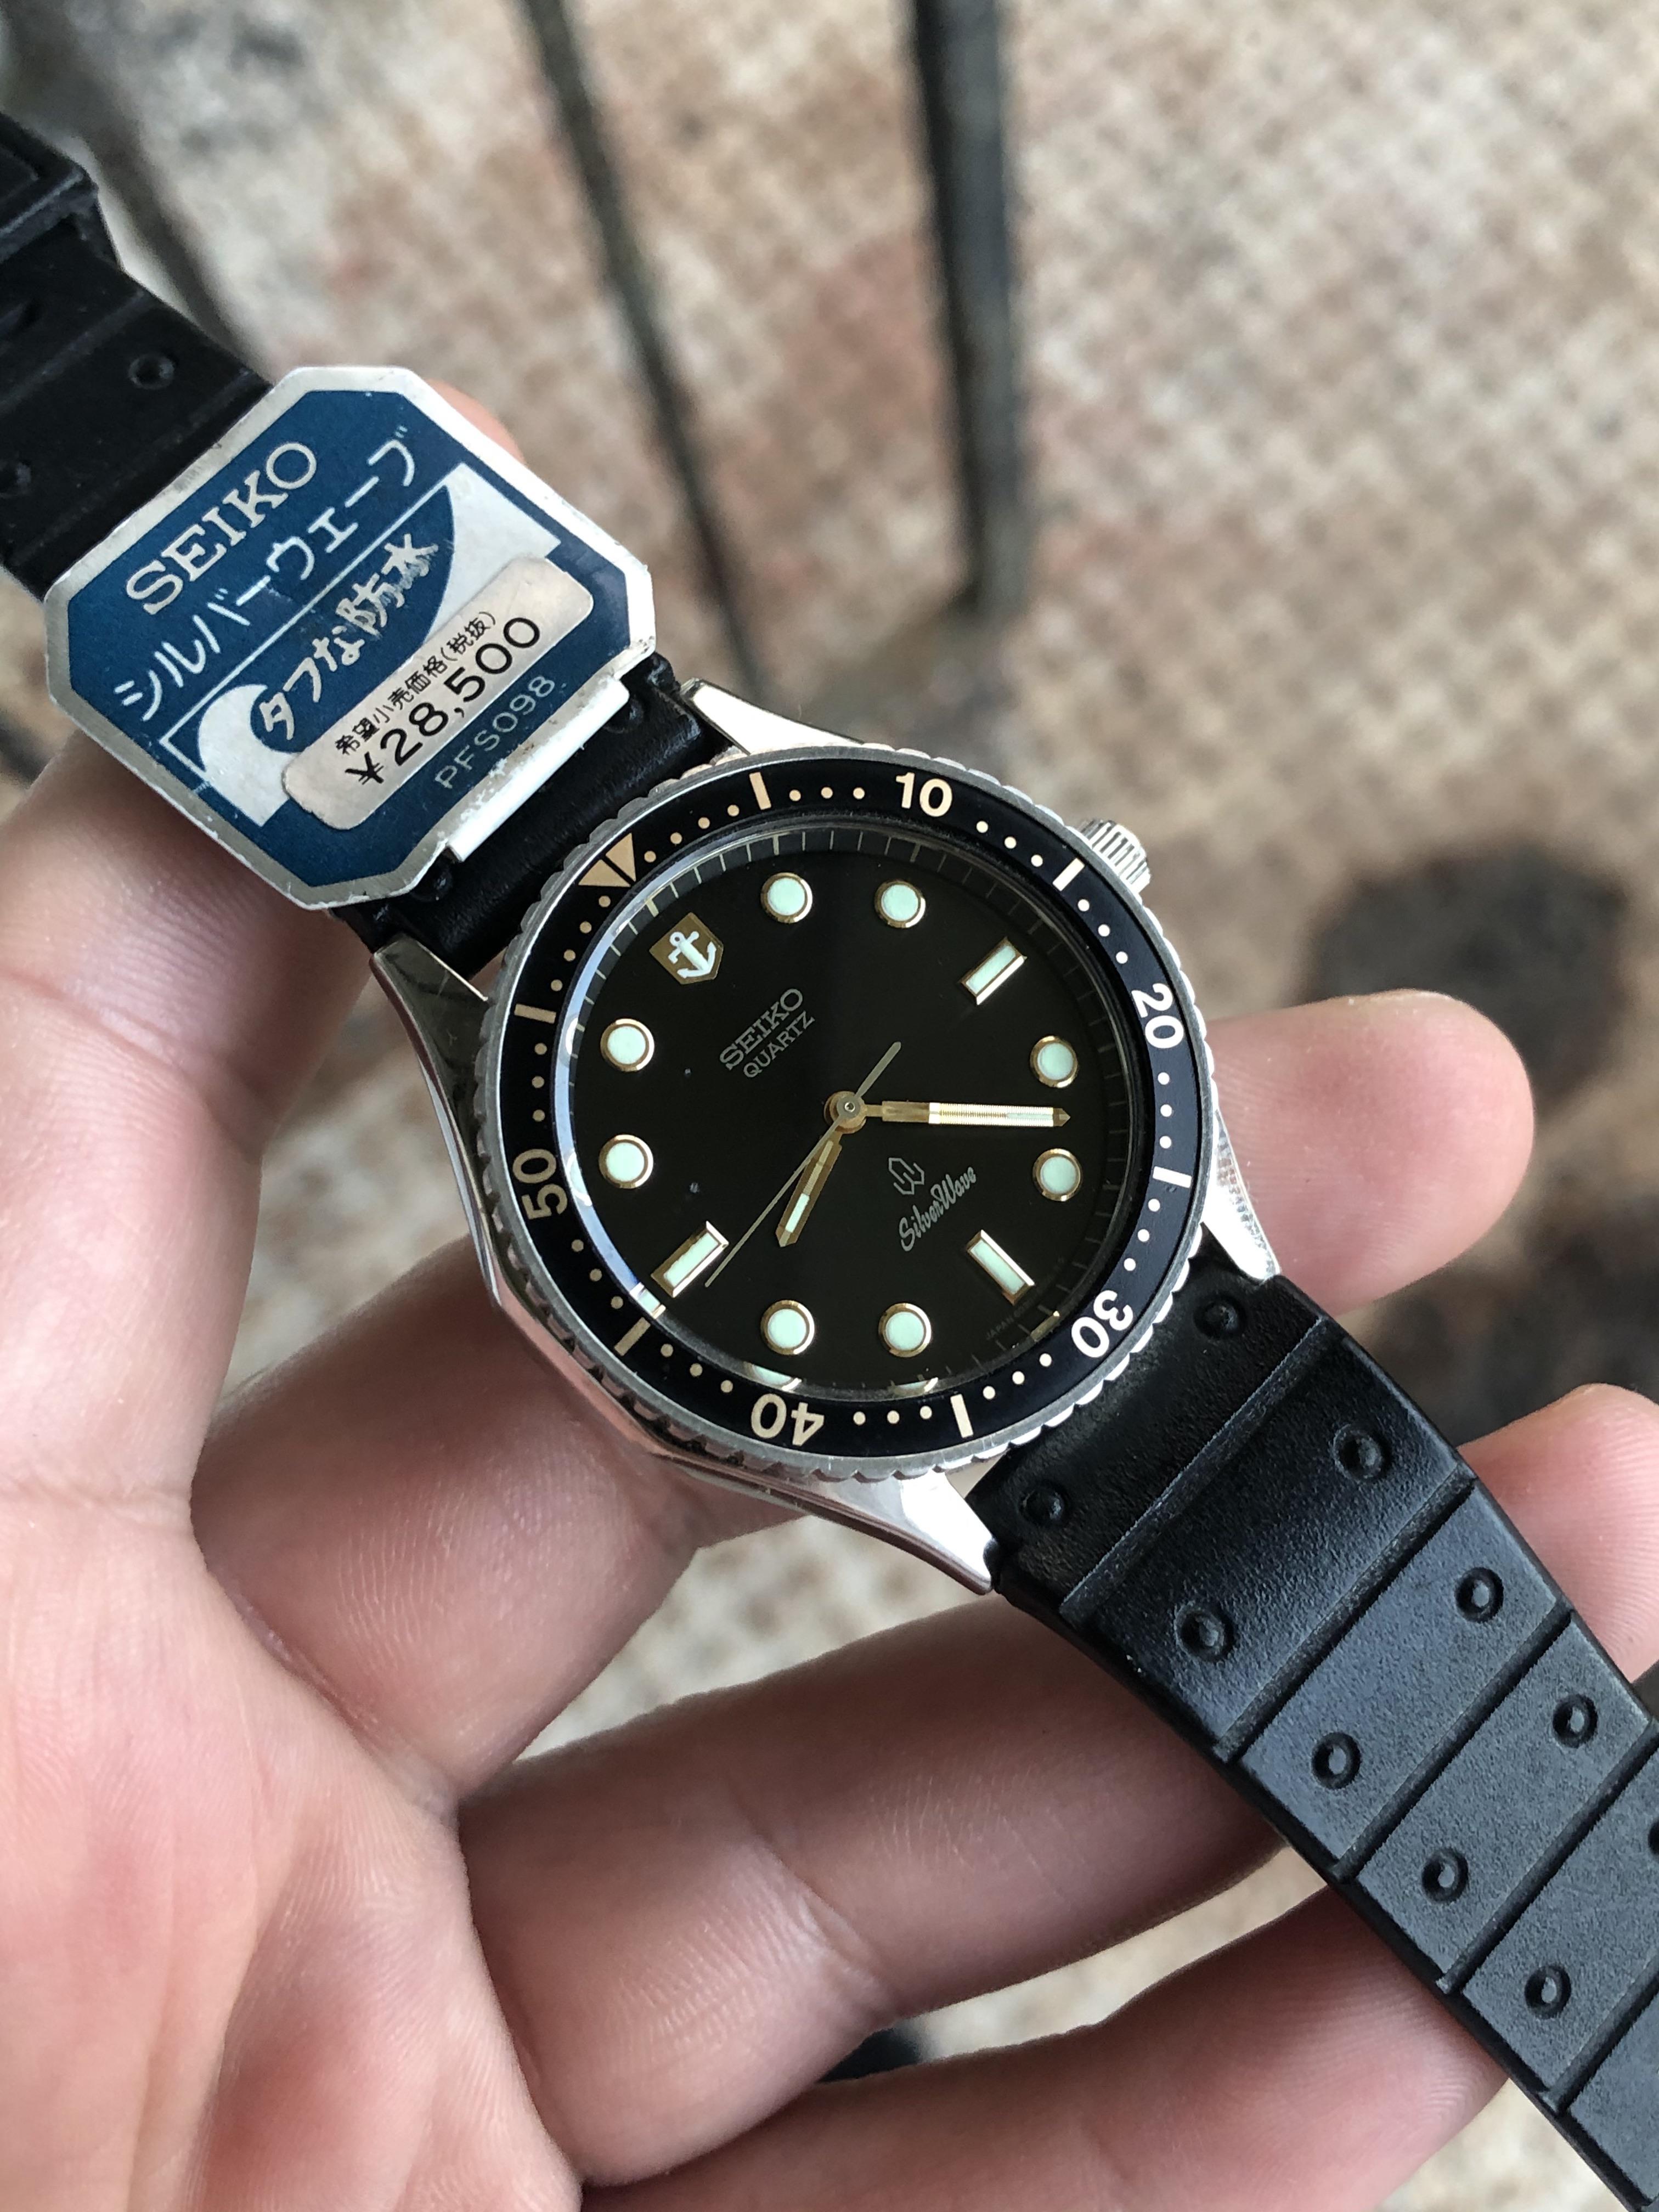 WTS] New Old Stock GILTY March 1981 Seiko 6030-6010 [$300 NET